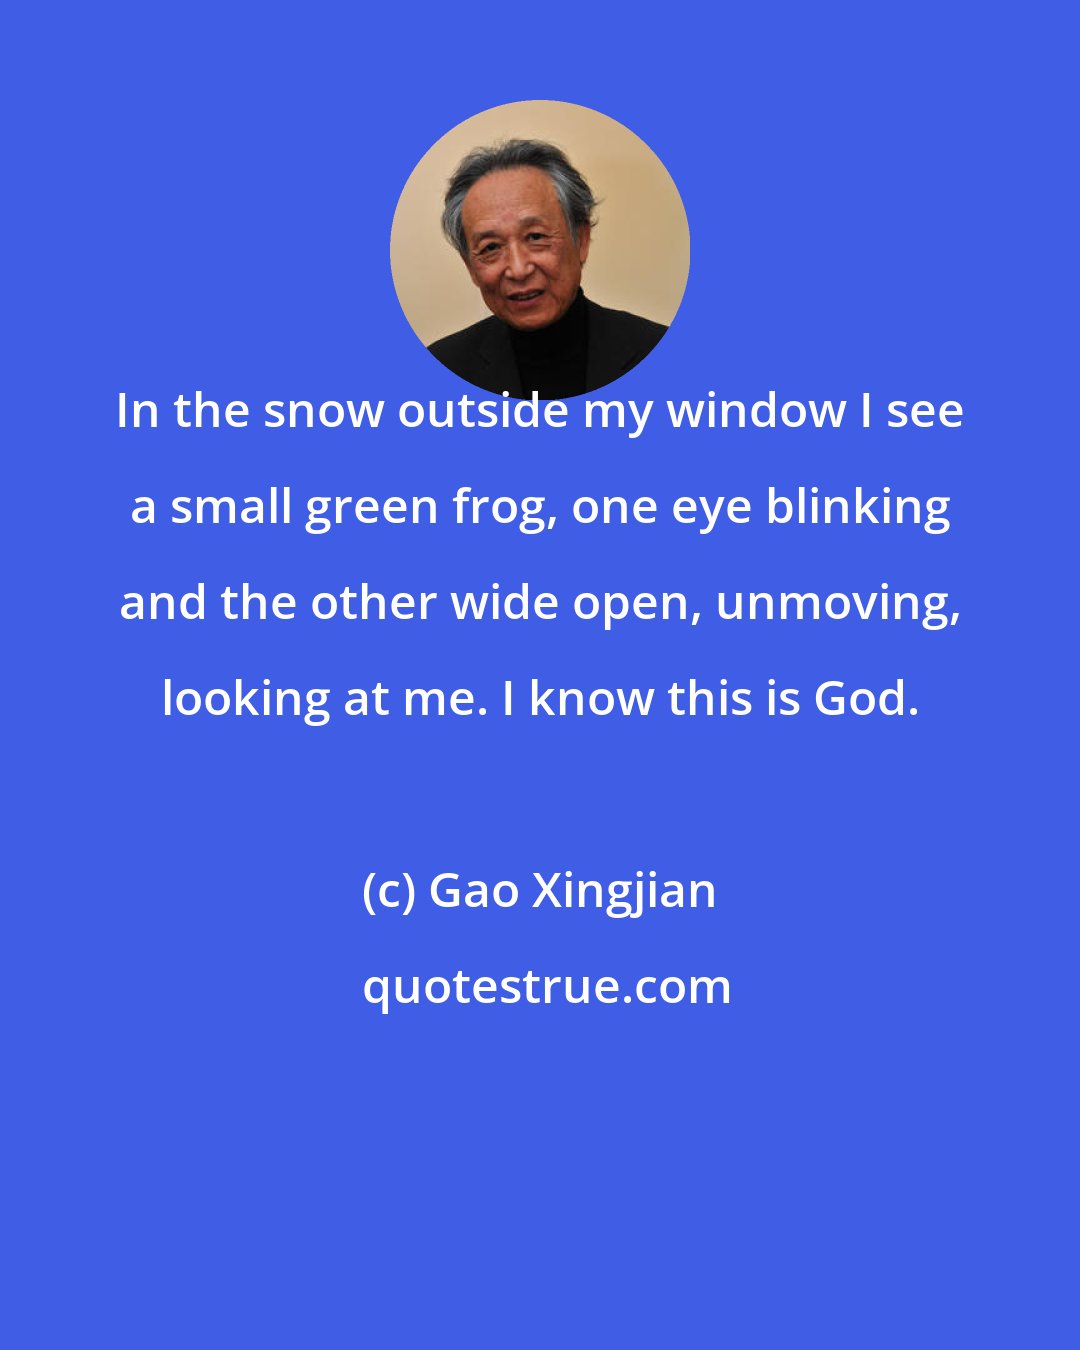 Gao Xingjian: In the snow outside my window I see a small green frog, one eye blinking and the other wide open, unmoving, looking at me. I know this is God.